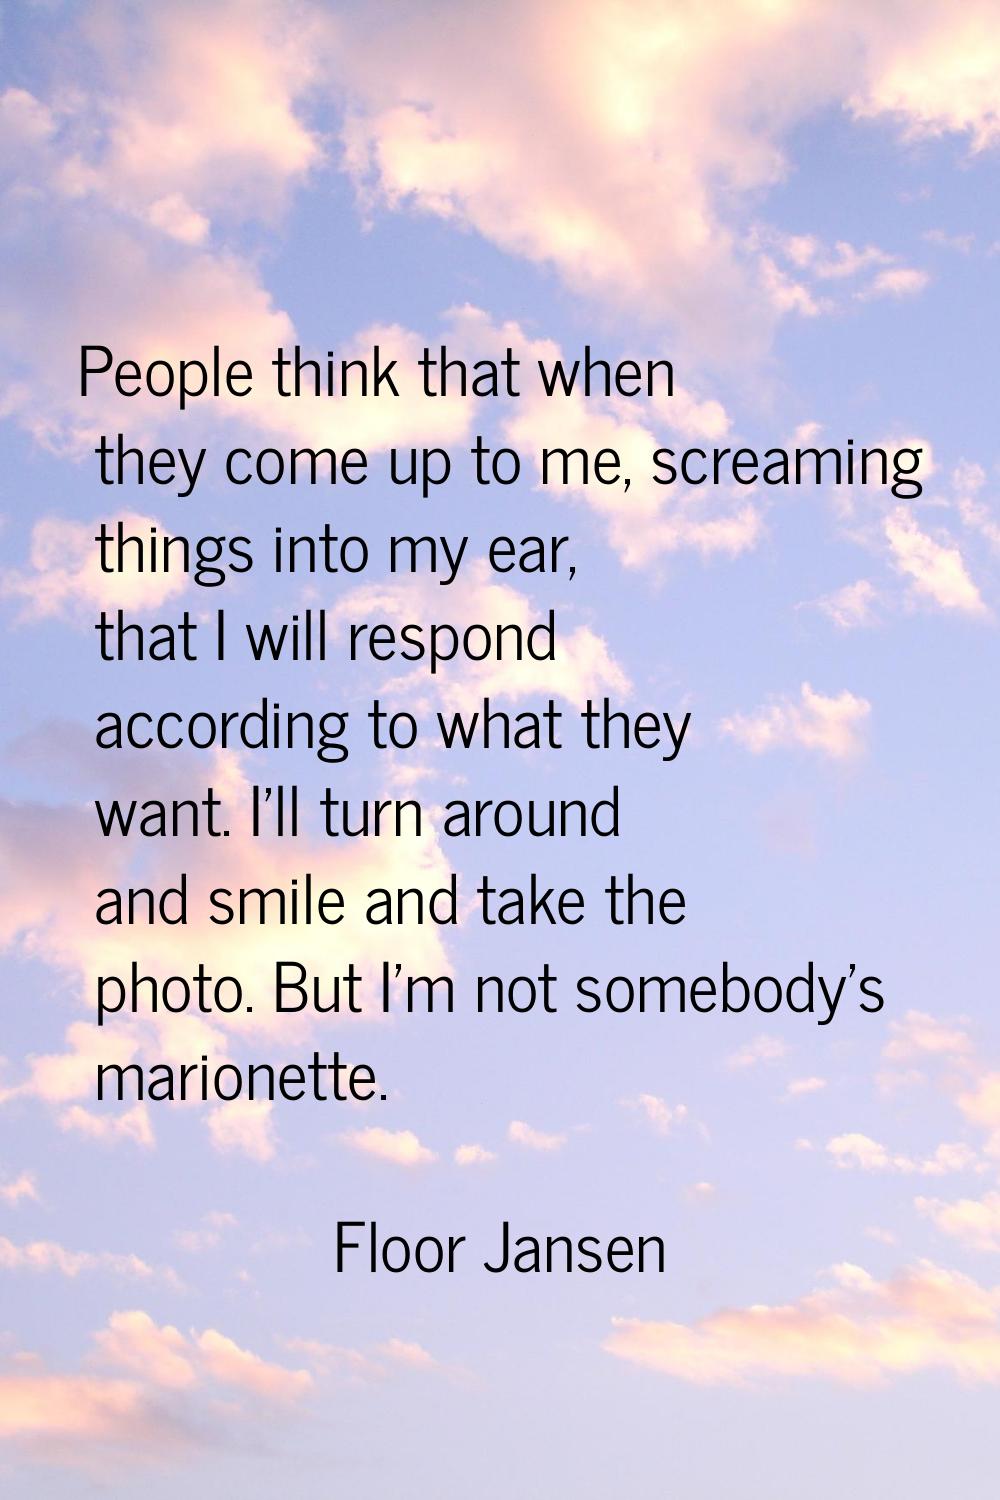 People think that when they come up to me, screaming things into my ear, that I will respond accord